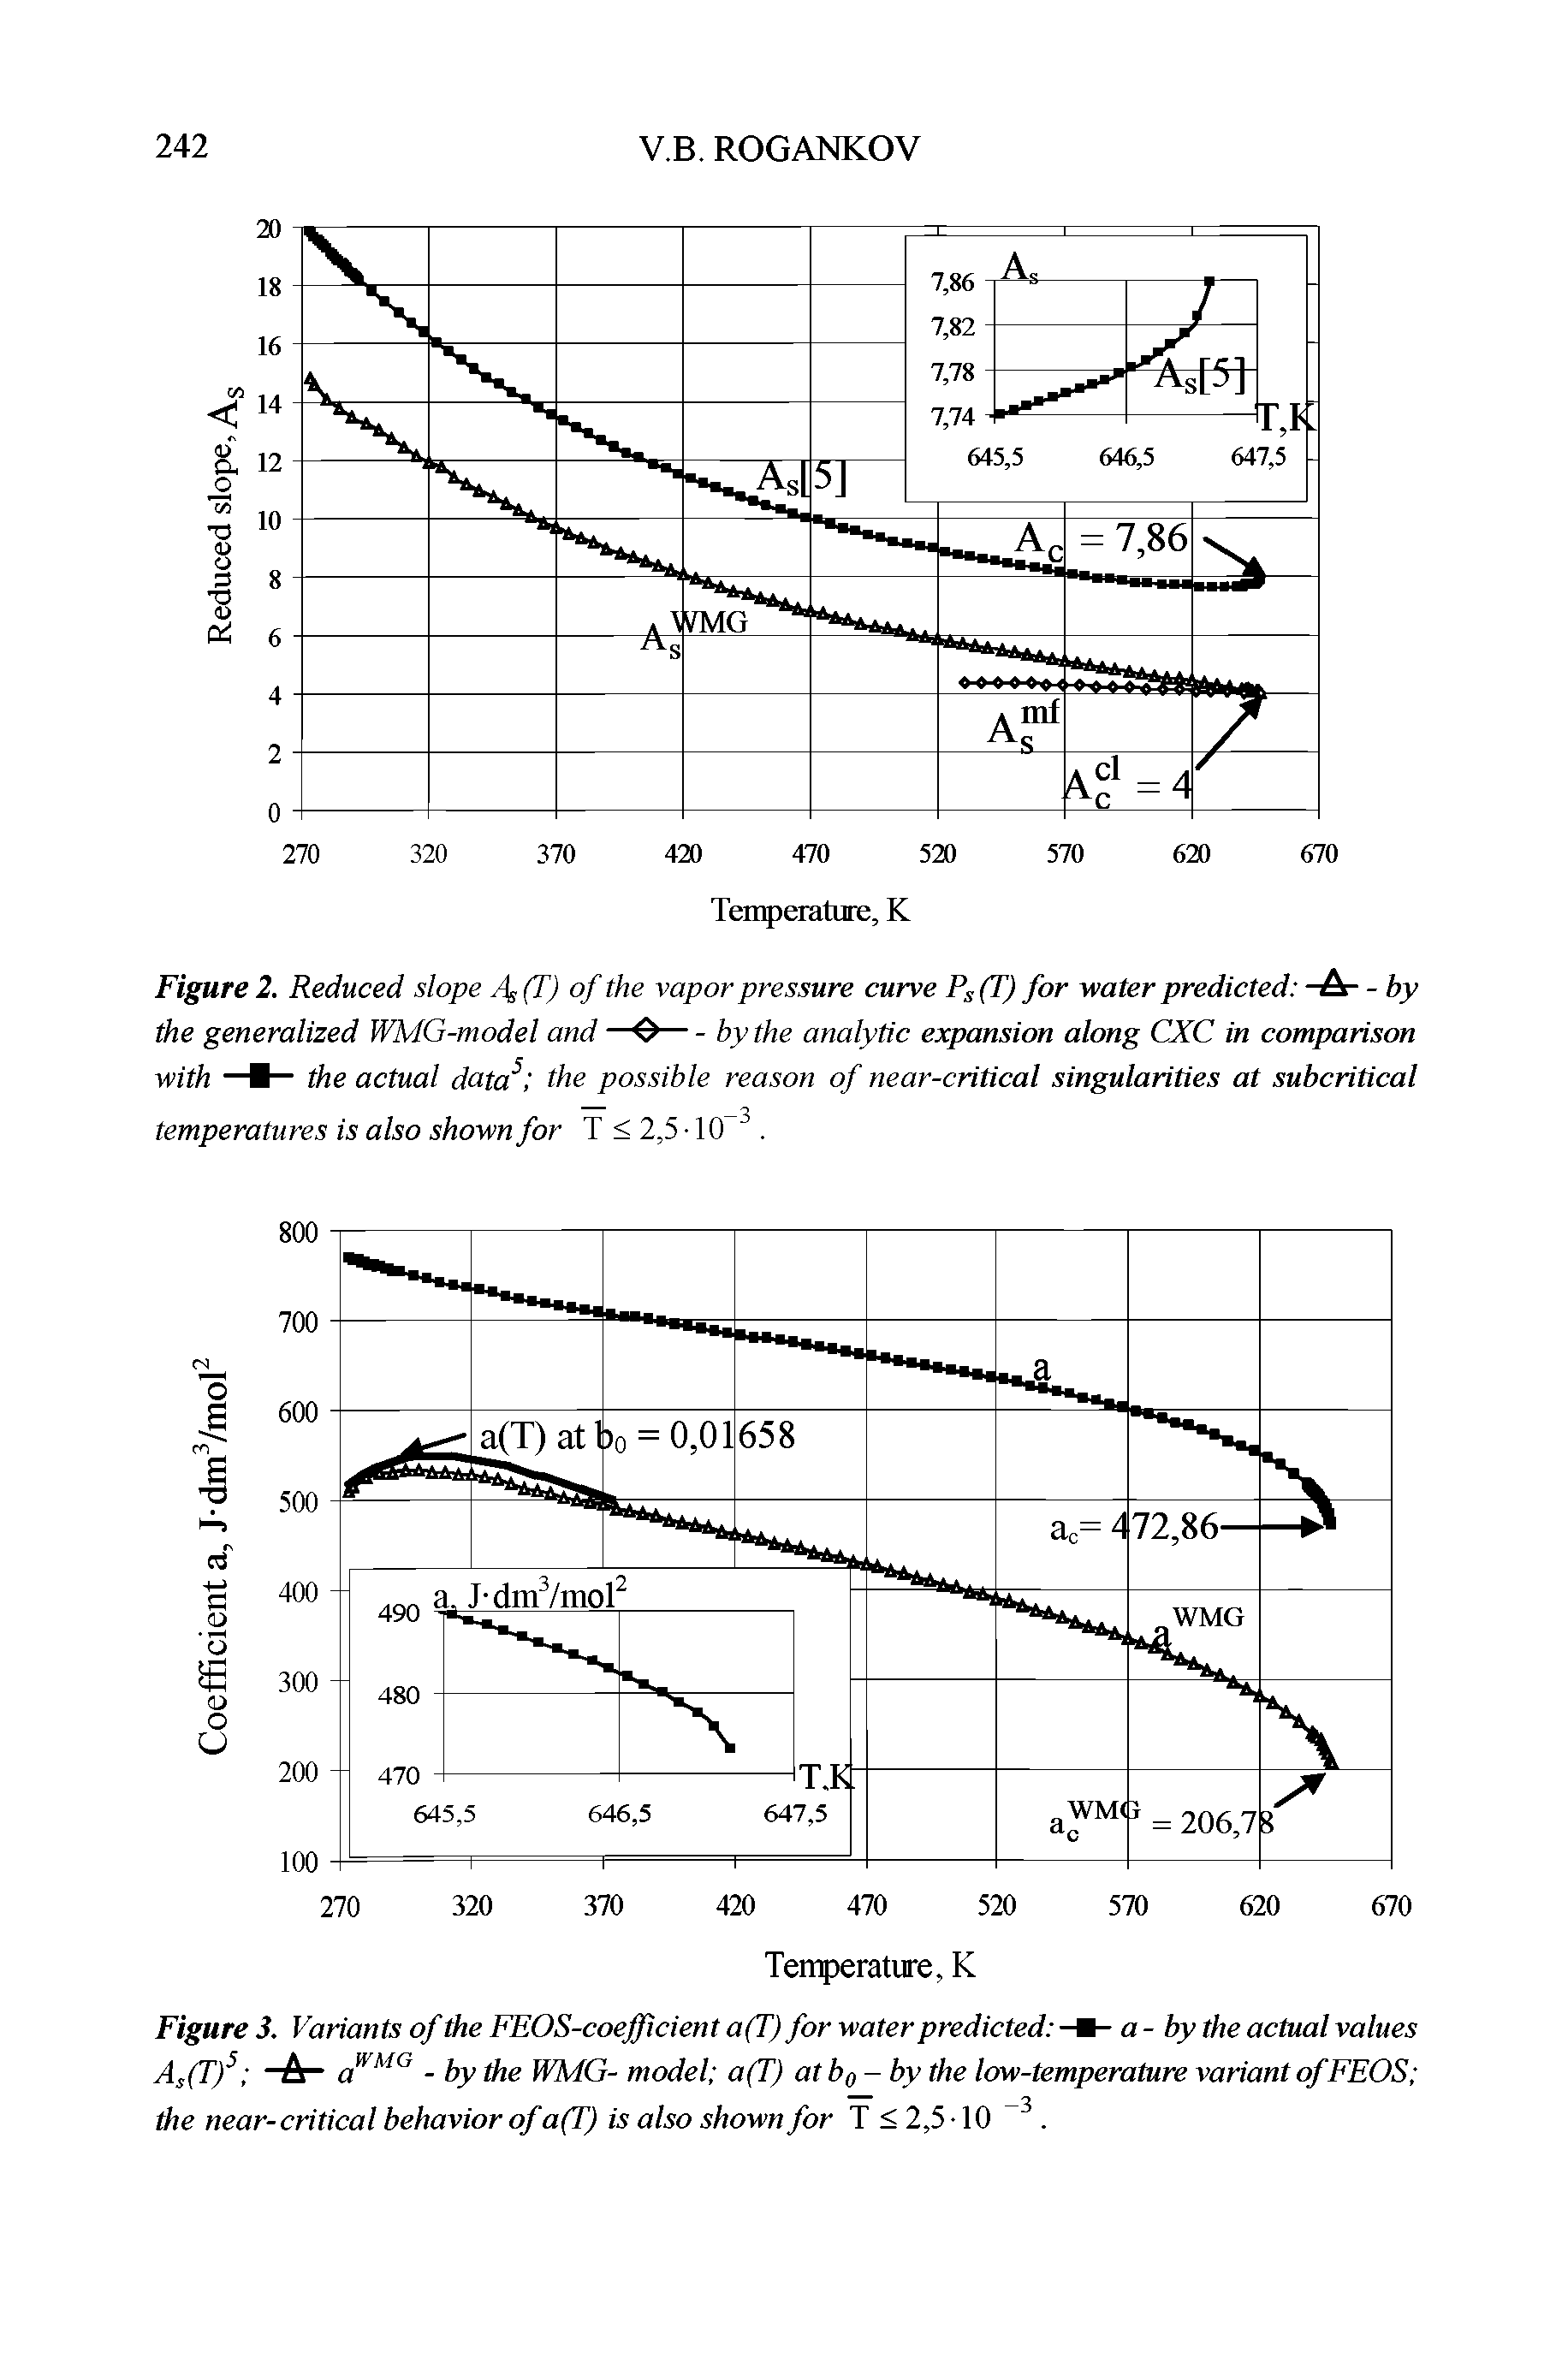 Figure 2. Reduced slope As(T) of the vapor pressure curve (T) for water predicted -A- - by the generalized WMG-model and —0—- by the analytic expansion along CXC in comparison with —B— the actual data the possible reason of near-critical singularities at subcritical temperatures is also shown for T <2,5-10. ...